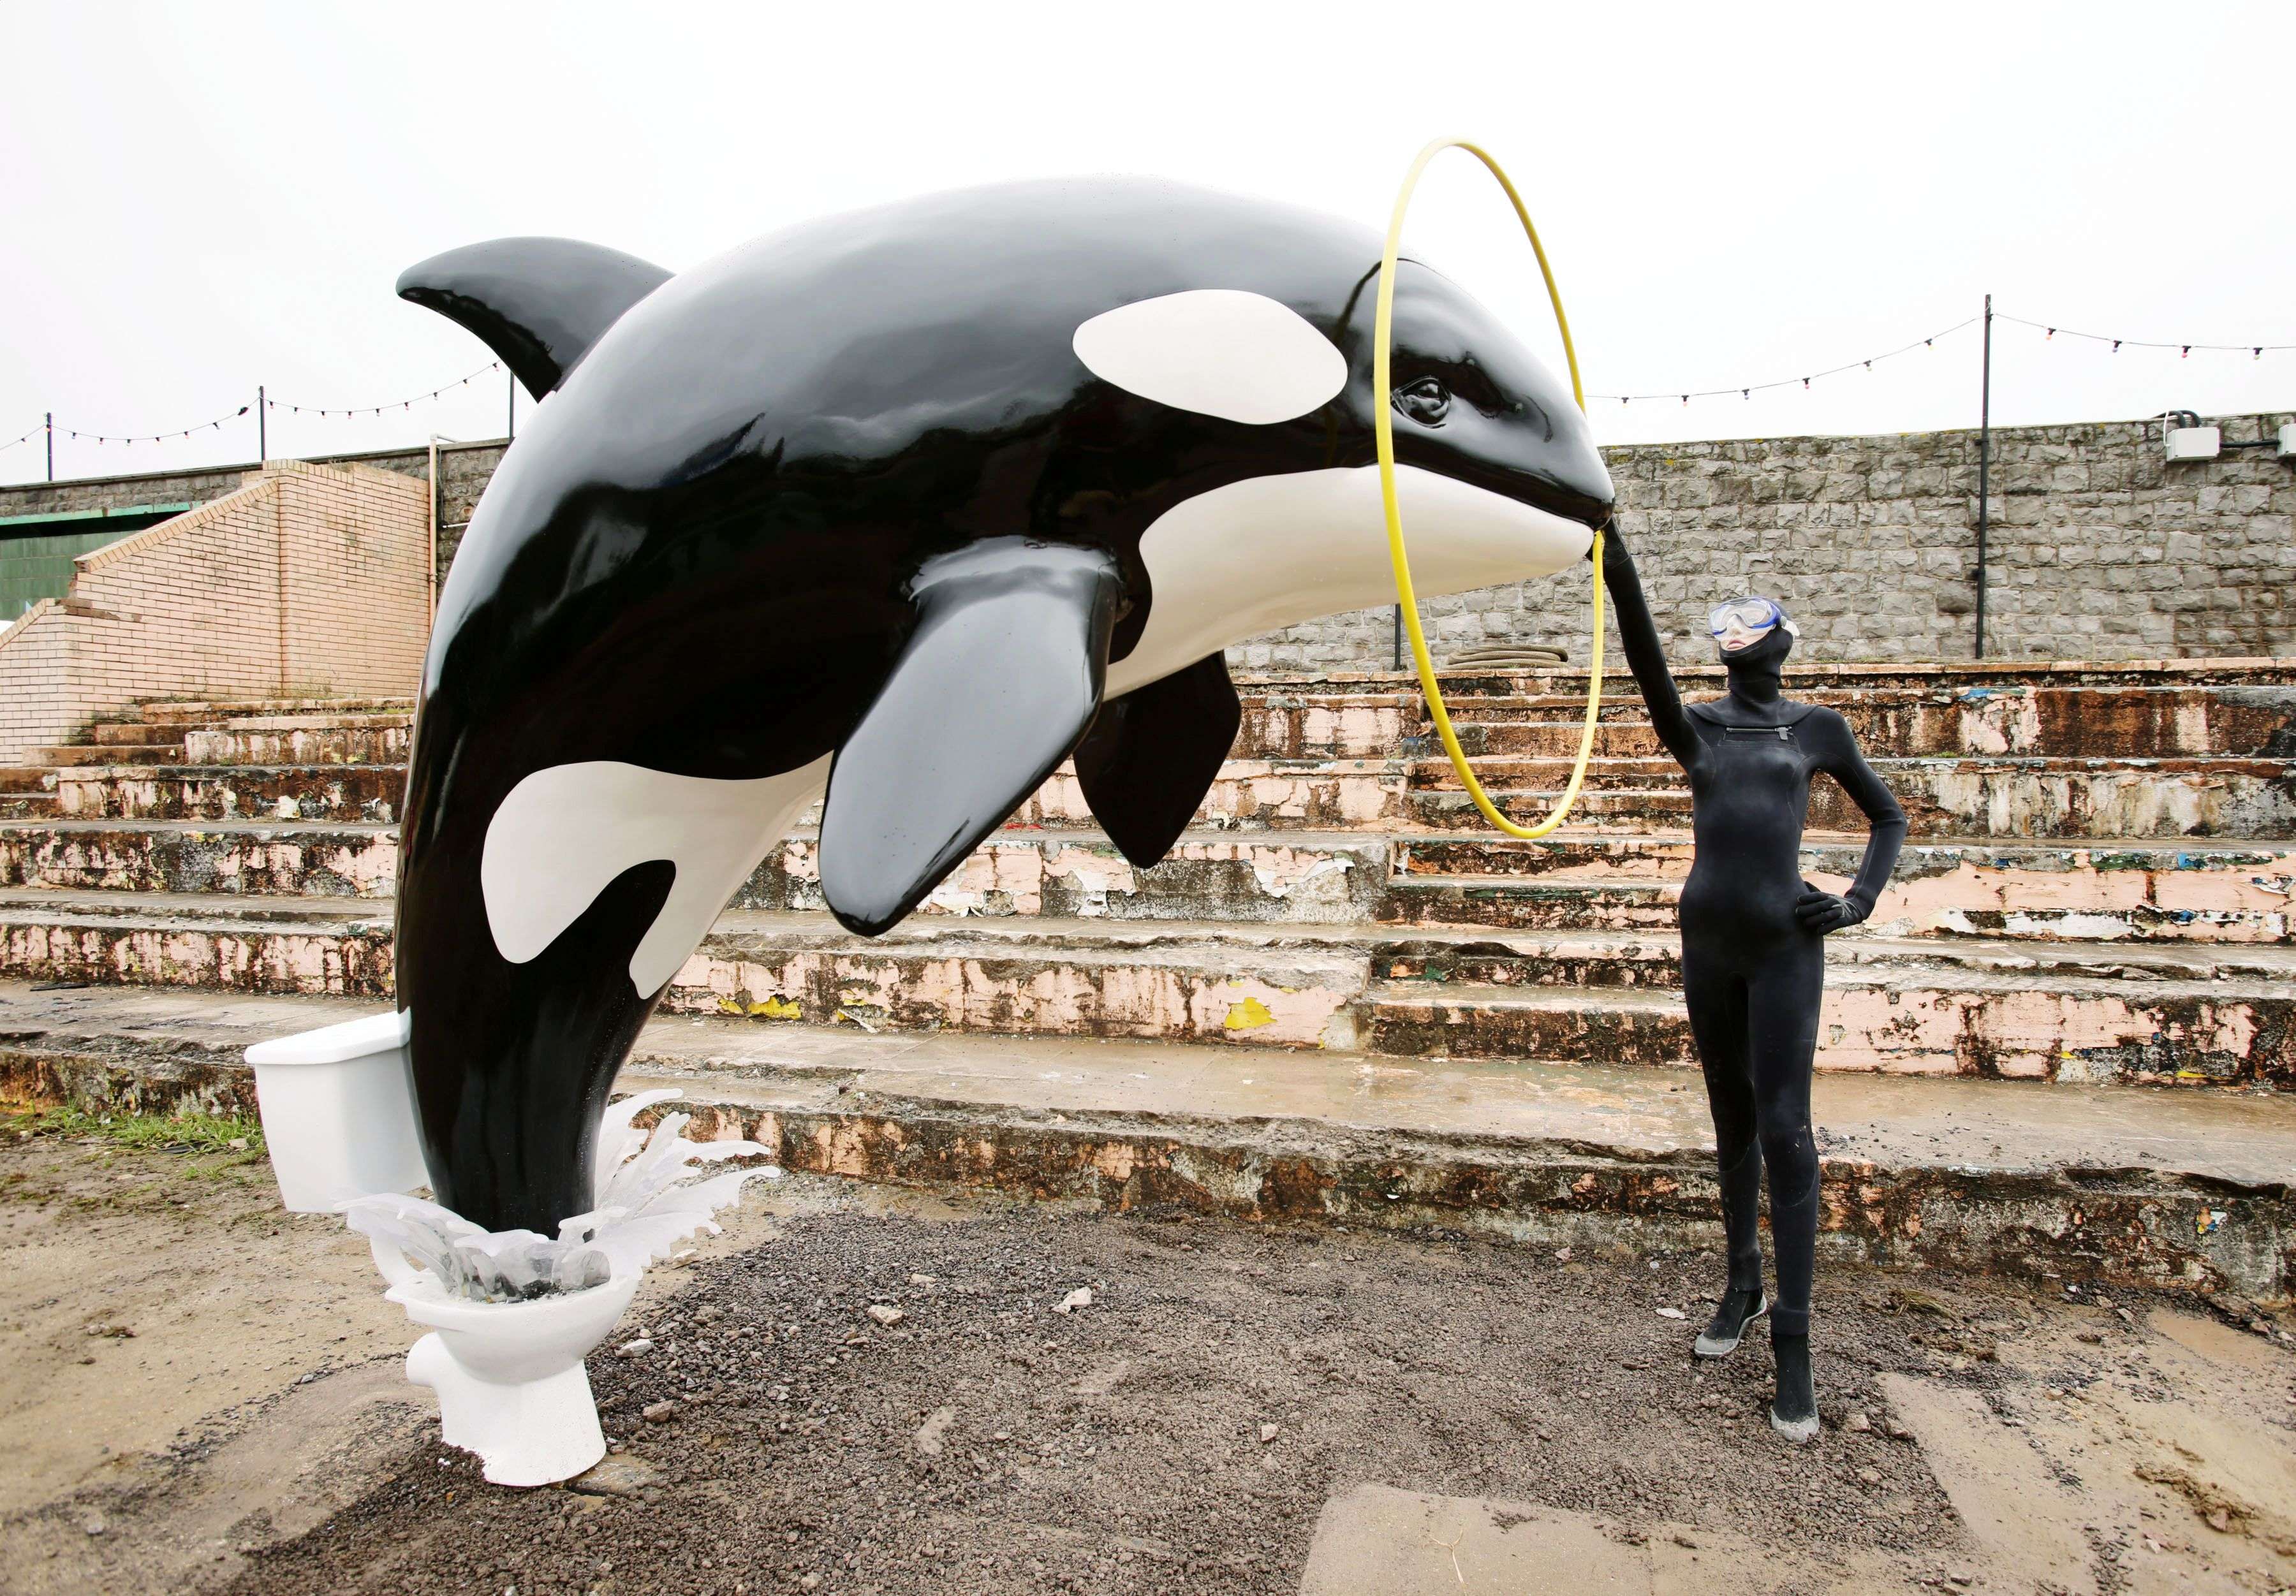 A Banksy piece depicting an orca whale jumping out of a toilet is displayed at Banksy's biggest show to date, entitled 'Dismaland', during a press viewing in Western-super-Mare, Somerset, England, Thursday, Aug. 20, 2015. (Yui Mok/PA Wire via AP) UNITED KINGDOM OUT, NO SALES, NO ARCHIVE